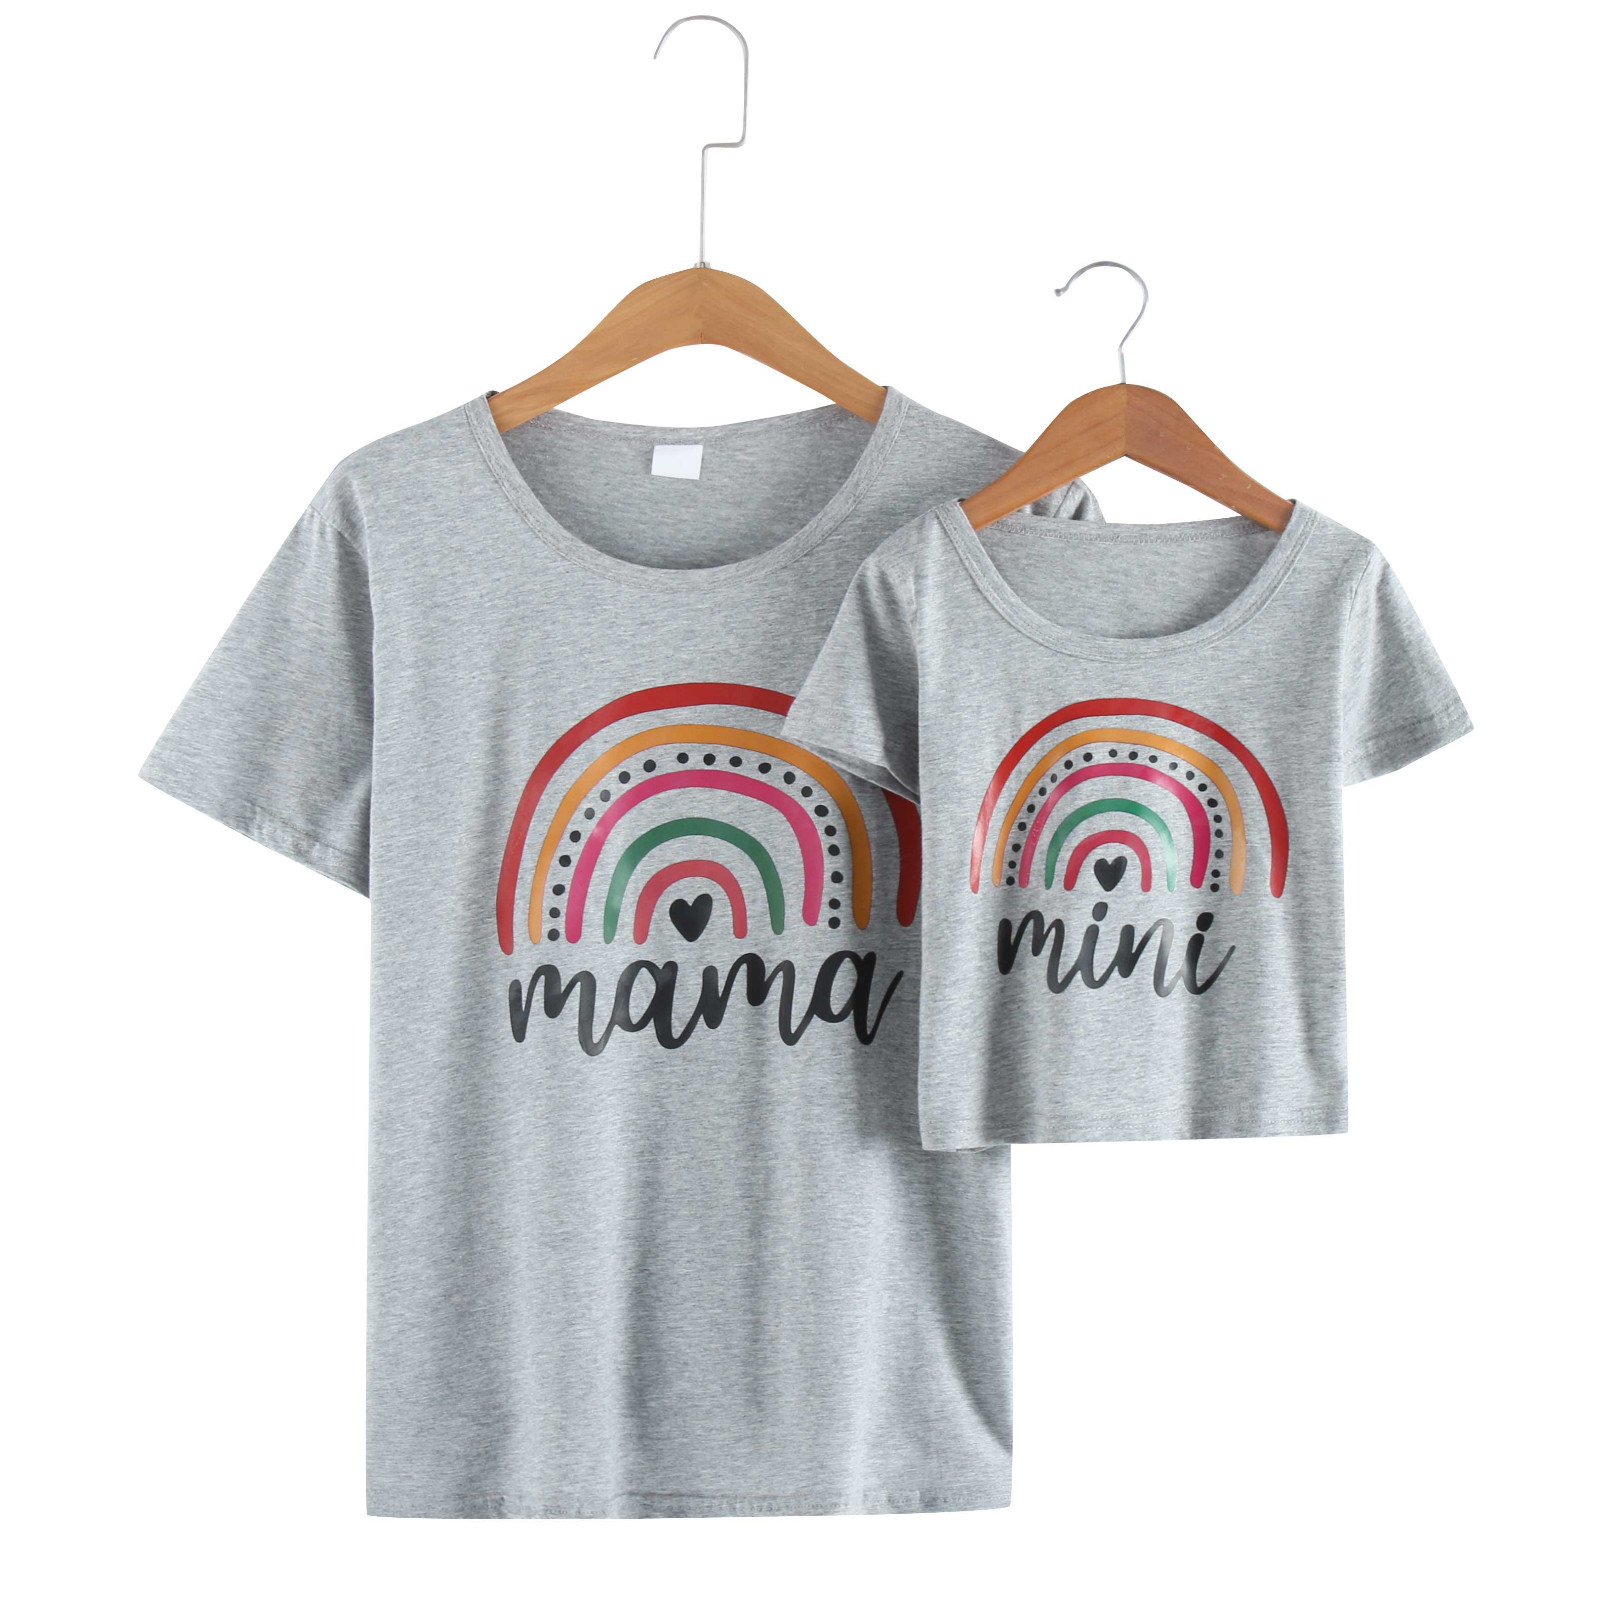 TAIAOJING Mommy and Me Outfits T Short Tops And Blouse Casual Kids Me Summer Clothes Shirt Outfits Sleeve Family Baby Mommy For Toddler Rainbow Tee Girls Girls Tops 2-3 Years - image 4 of 9